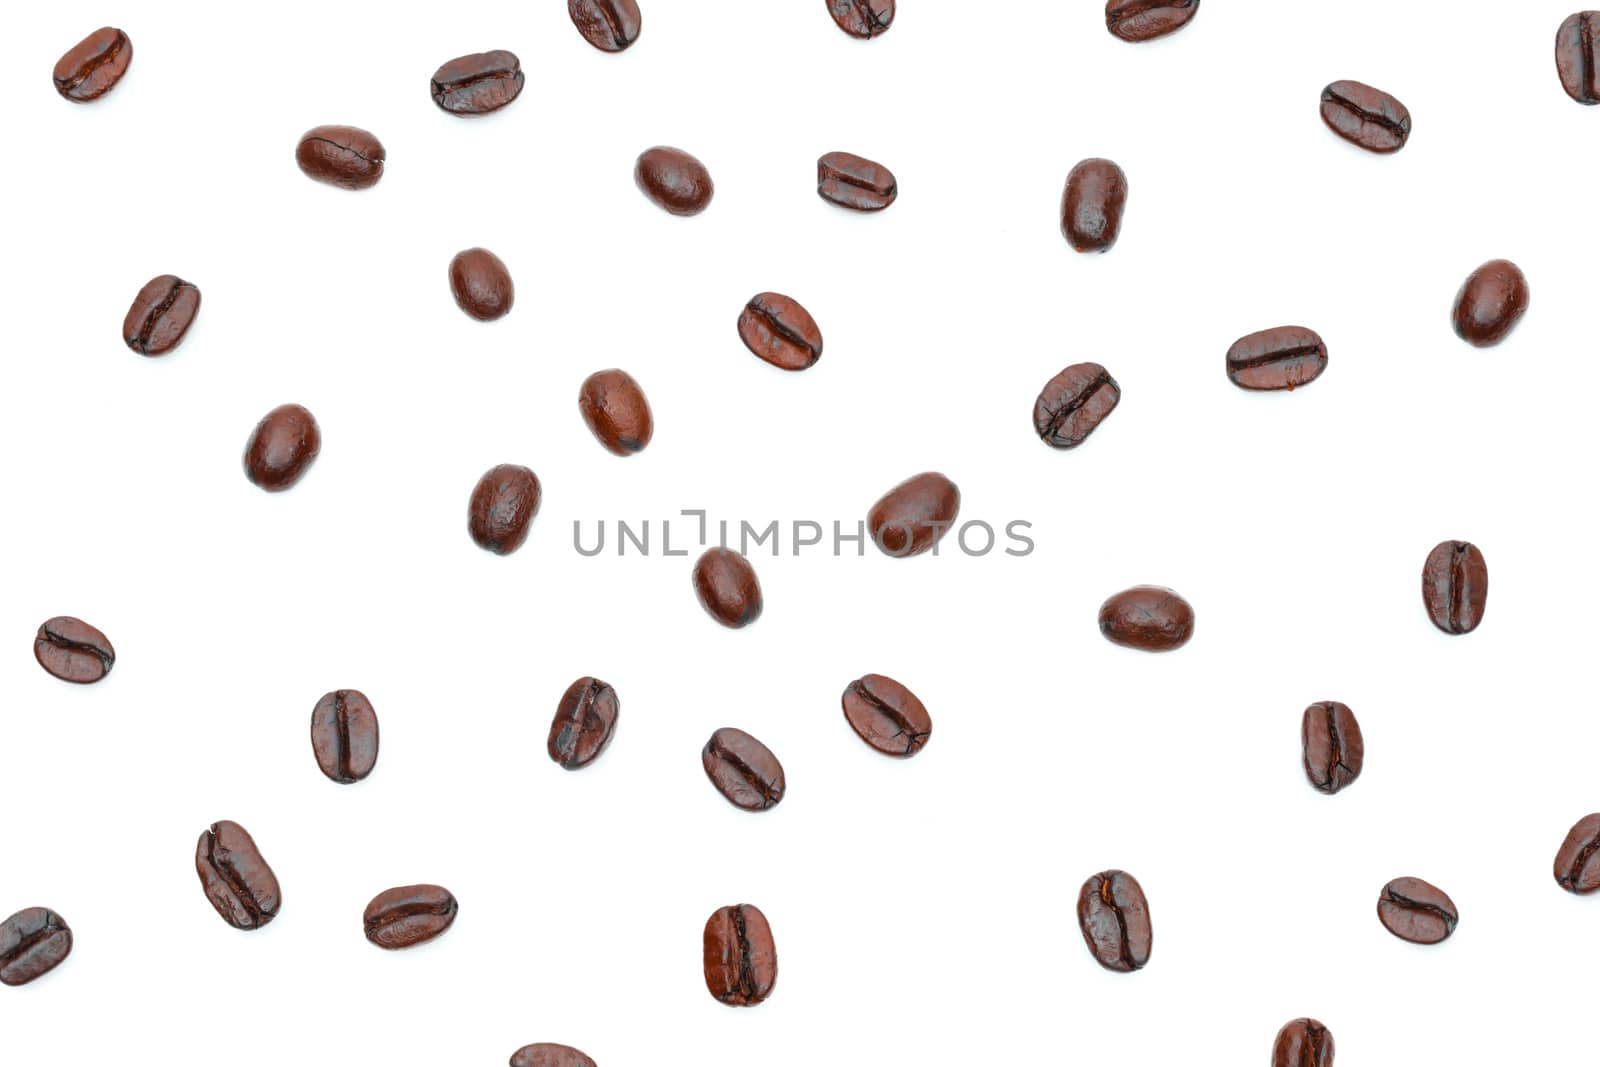 Roasted coffee beans in a white background